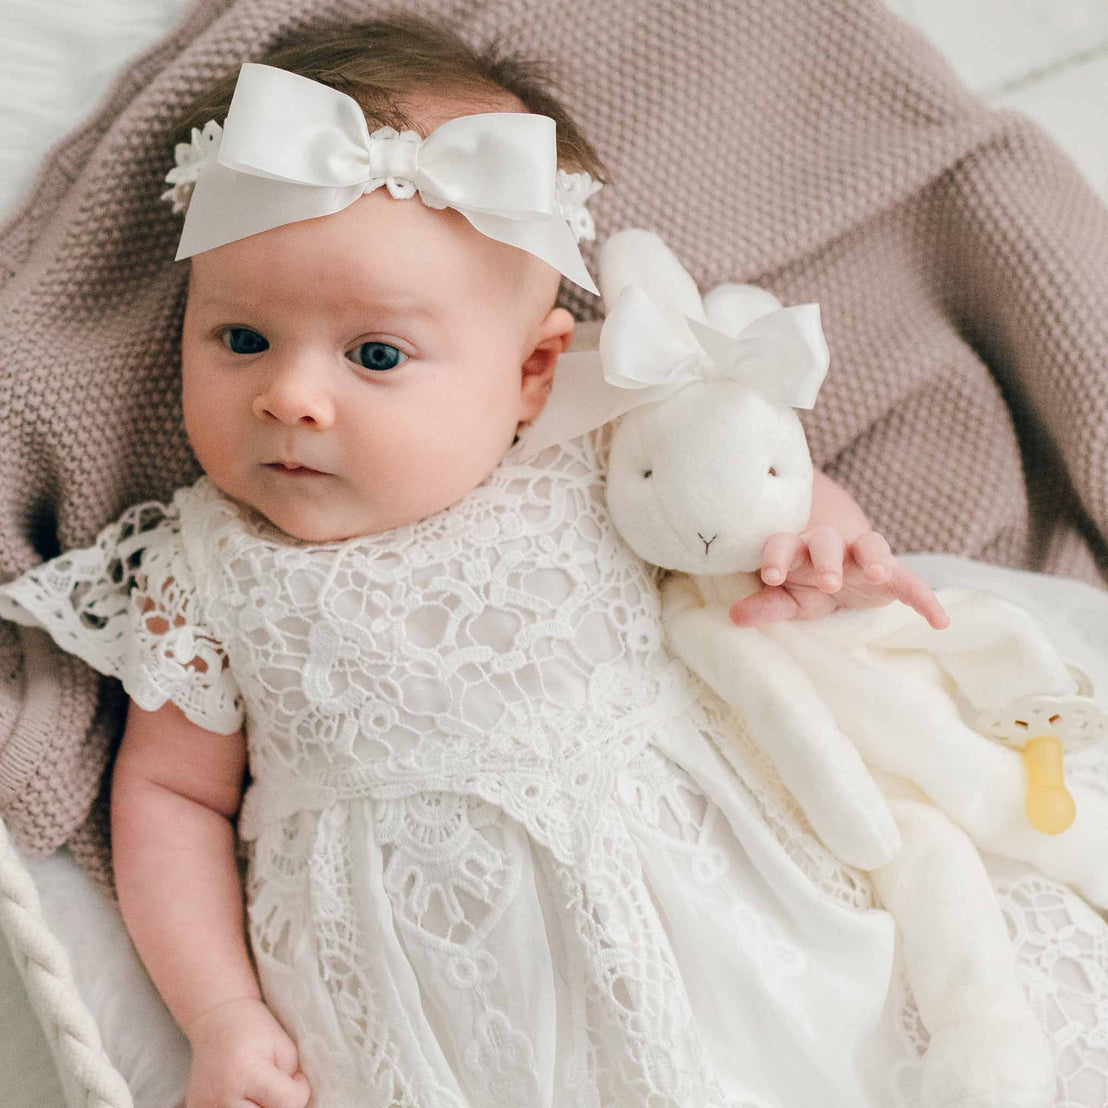 A baby wearing a white Grace Dress and a white bow headband, lying on a soft blanket and holding a plush bunny toy.